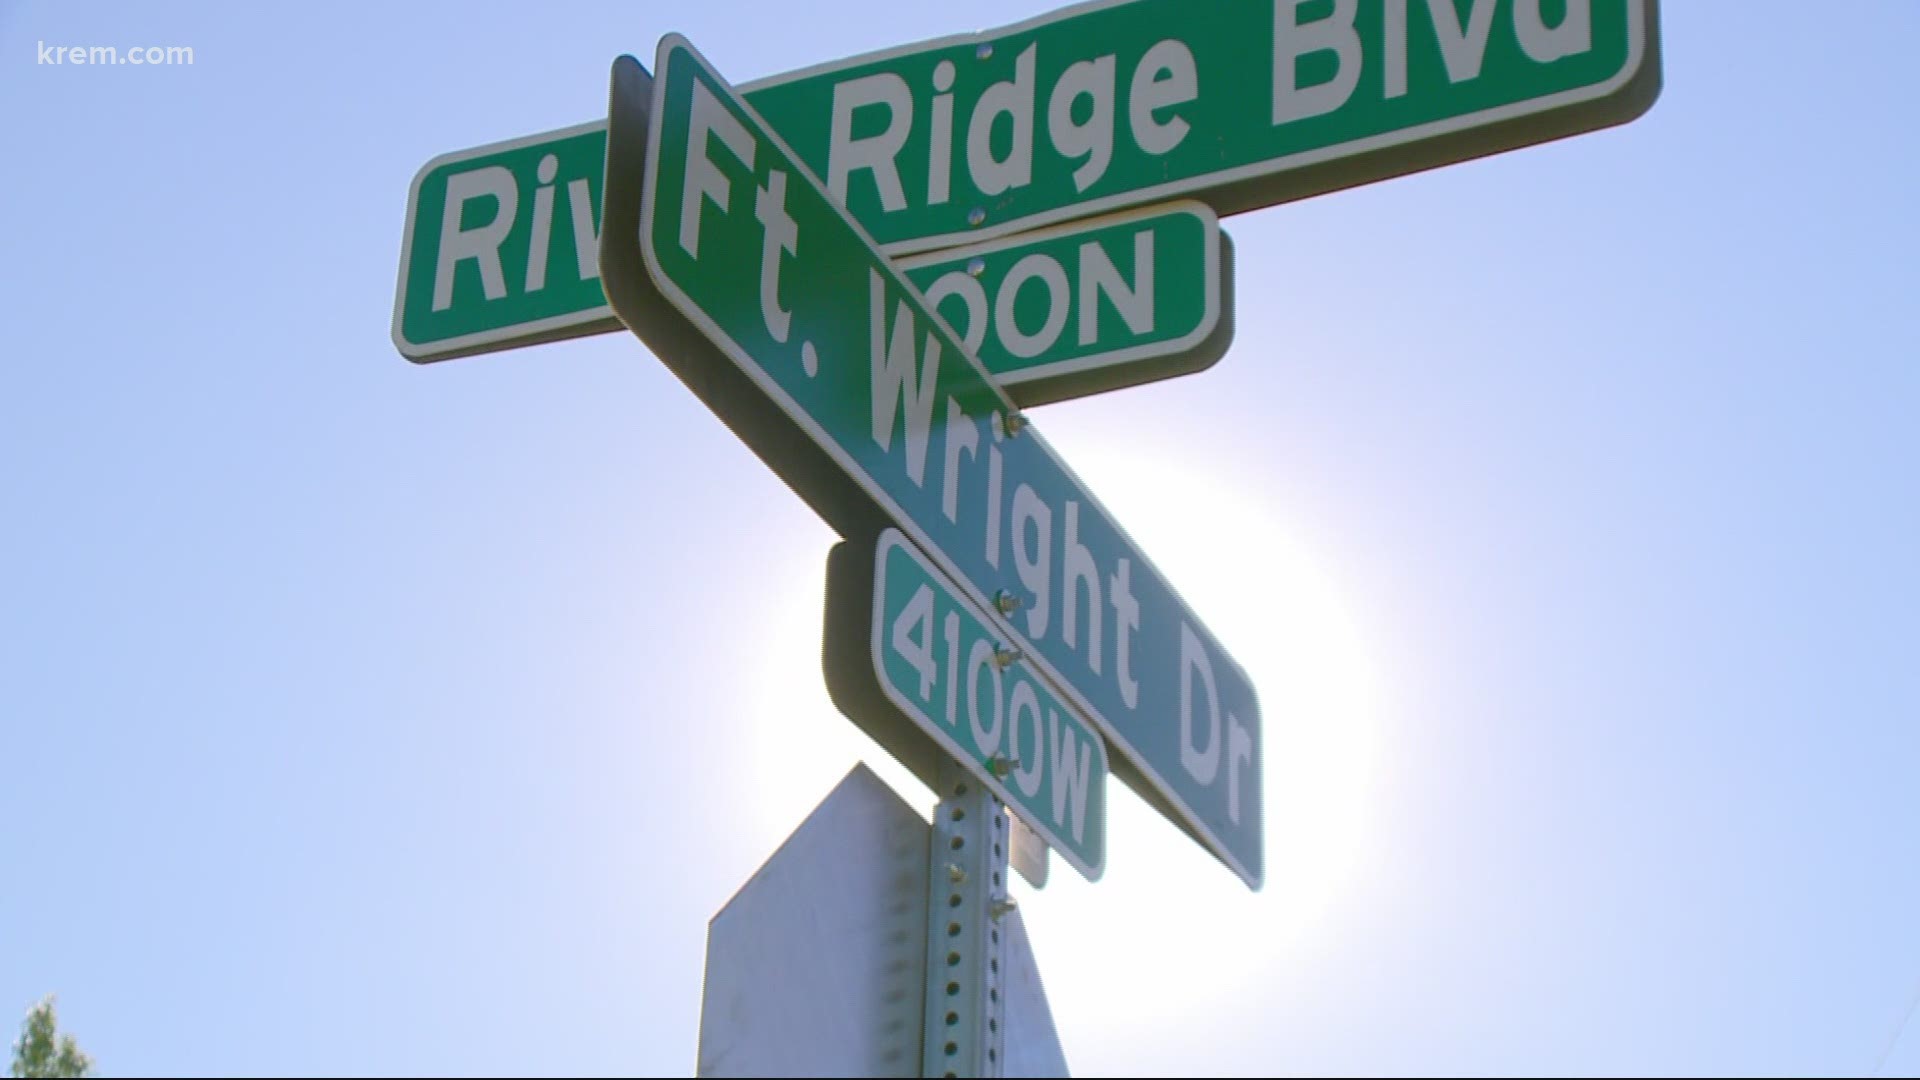 News of the name change comes a day after the Spokane City Council voted to change the name of Ft. George Wright Way to Whistalks Way.